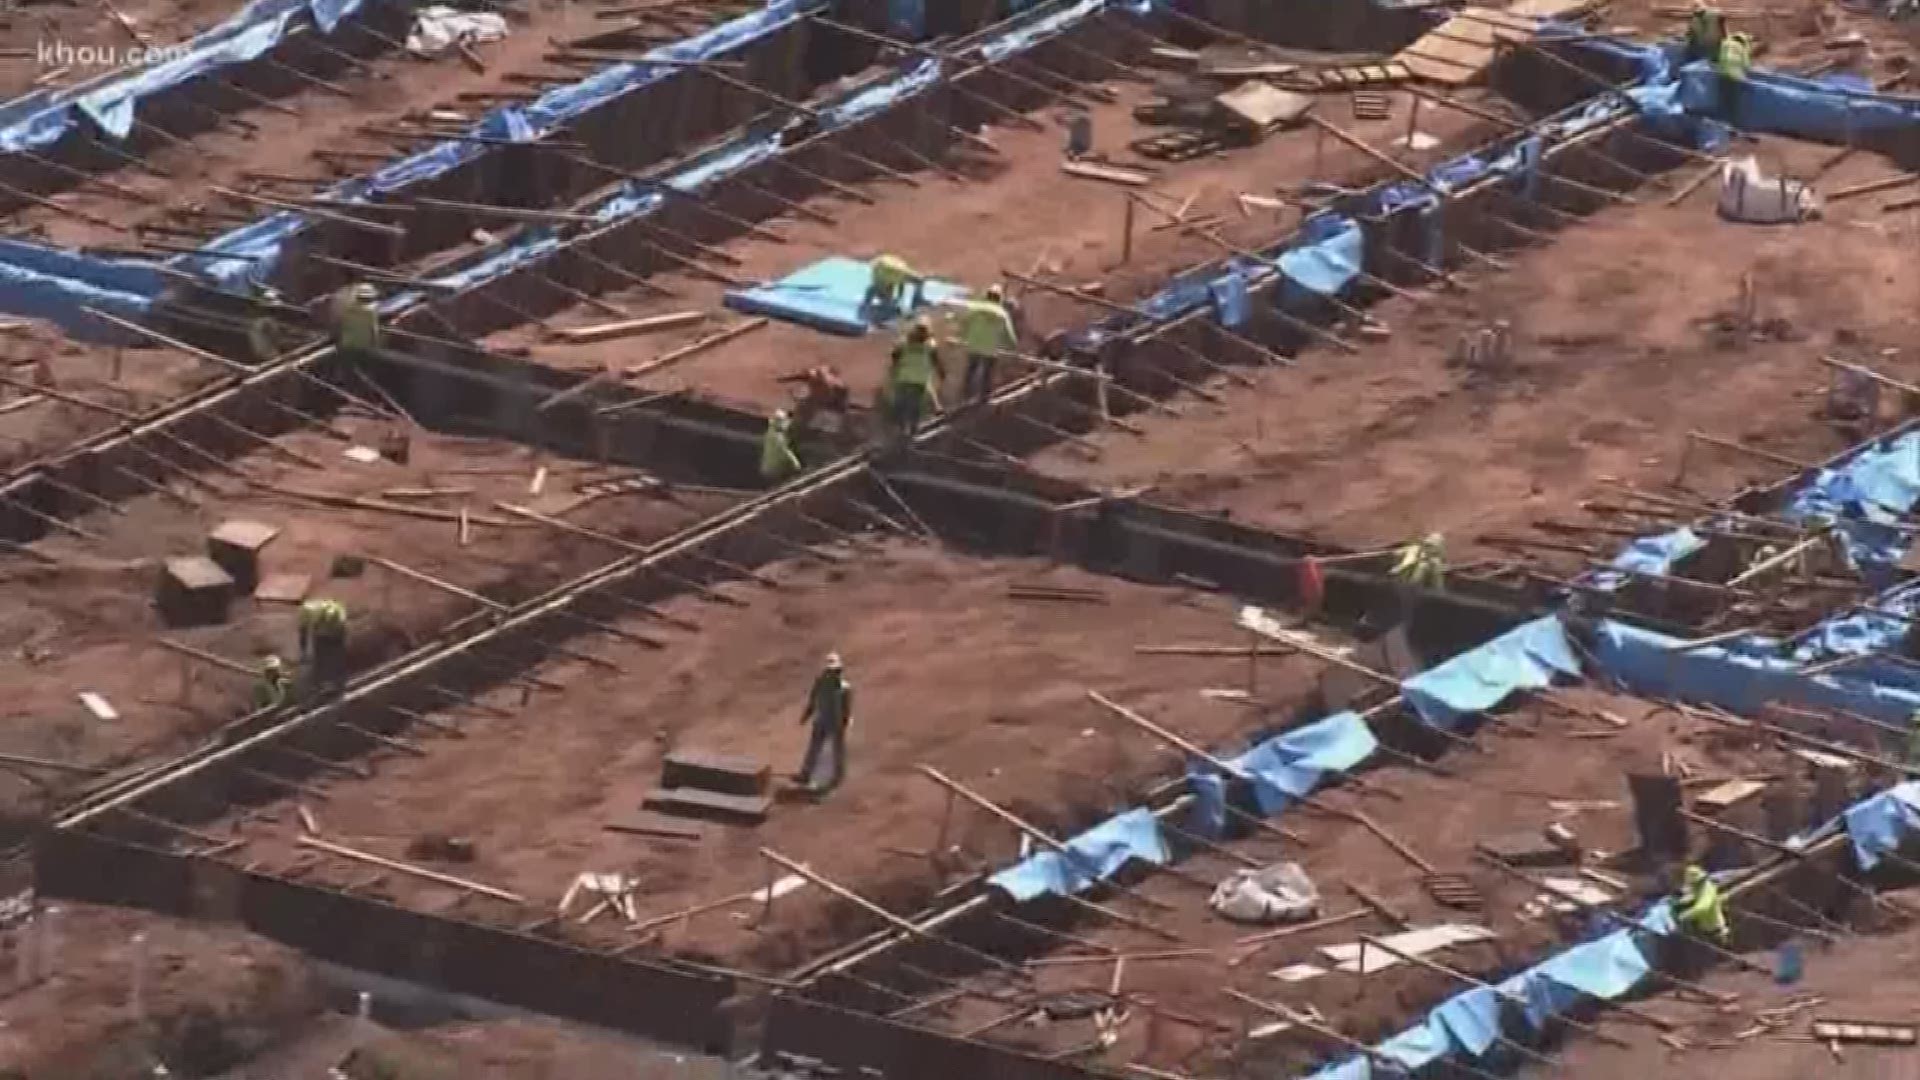 The remains of former slaves found hidden under a construction site in Sugar Land will be dug up, then moved to another location.